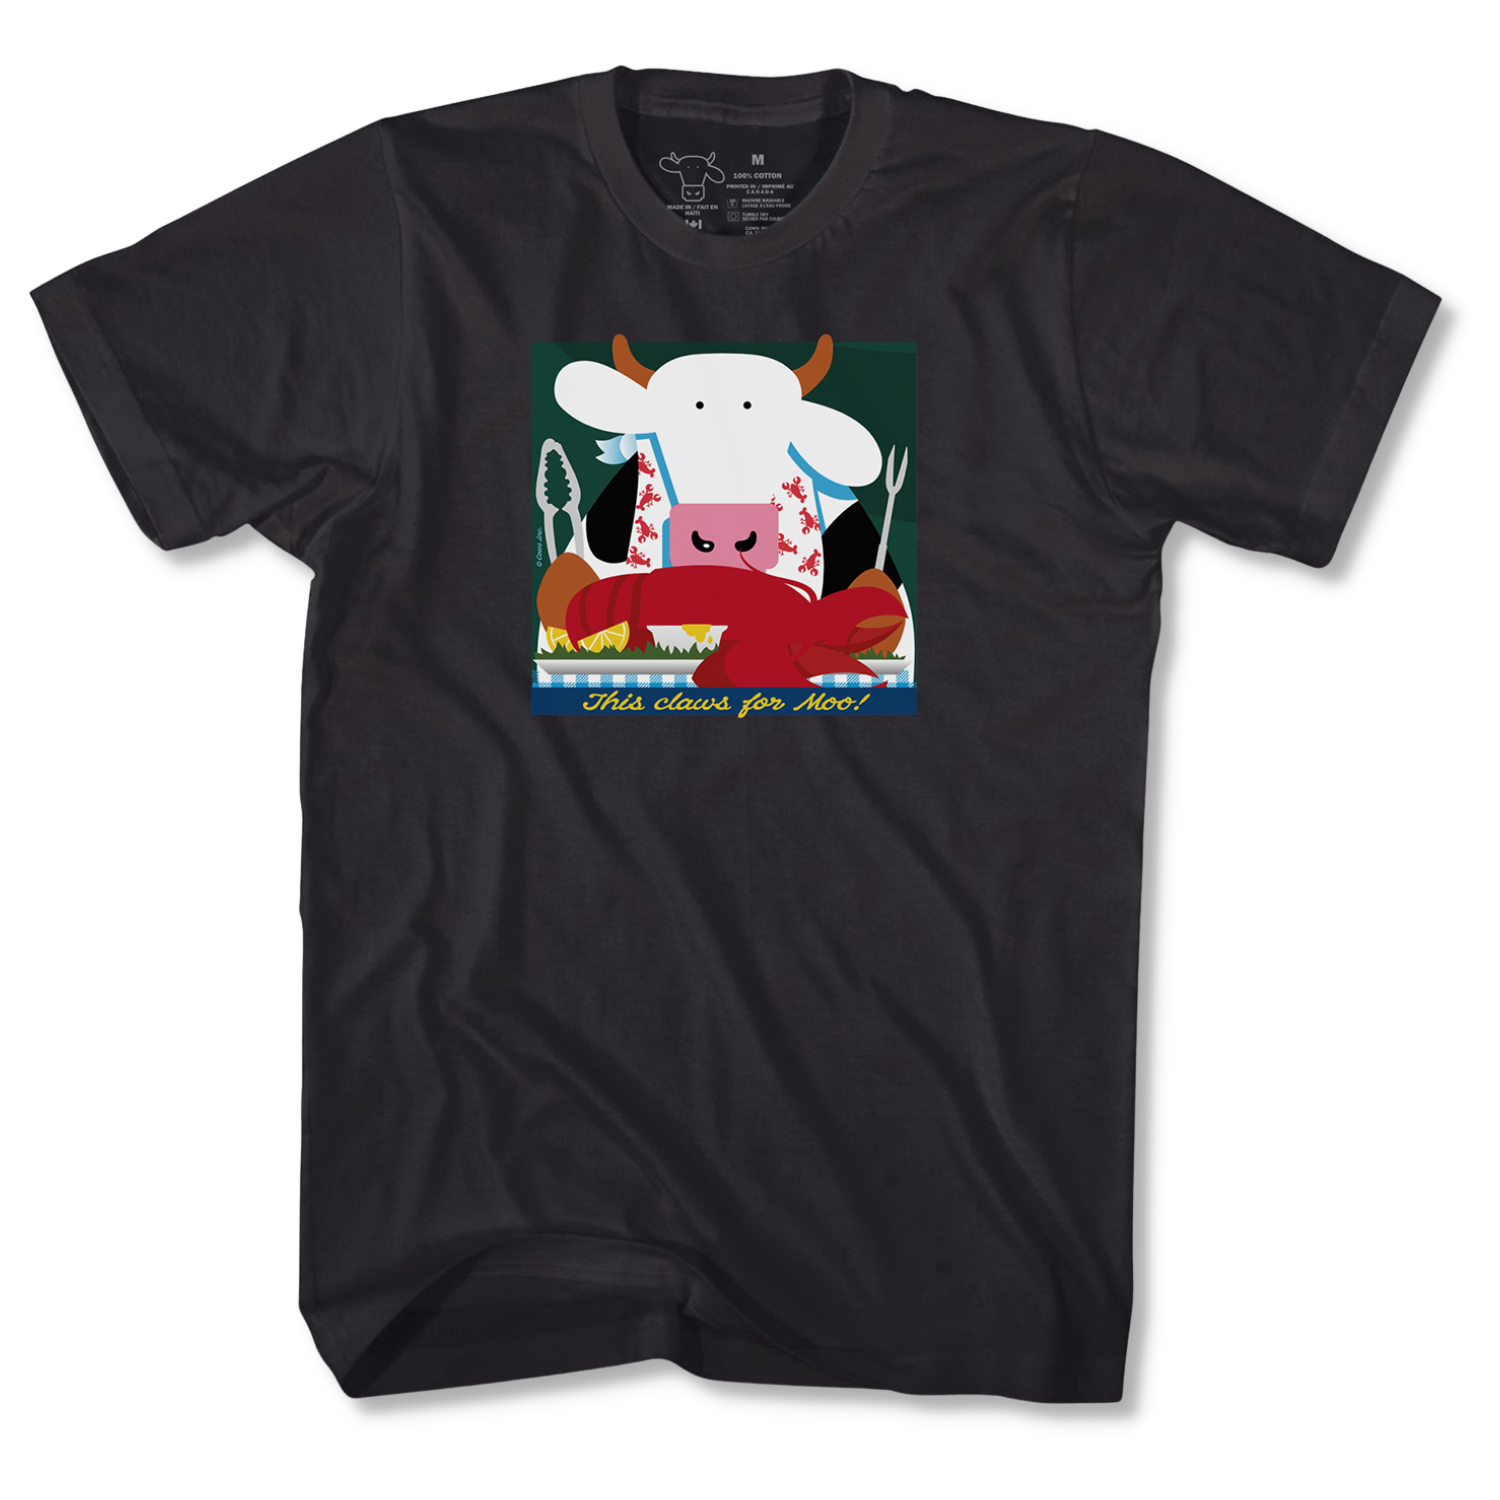 Lobster COWS Classic T